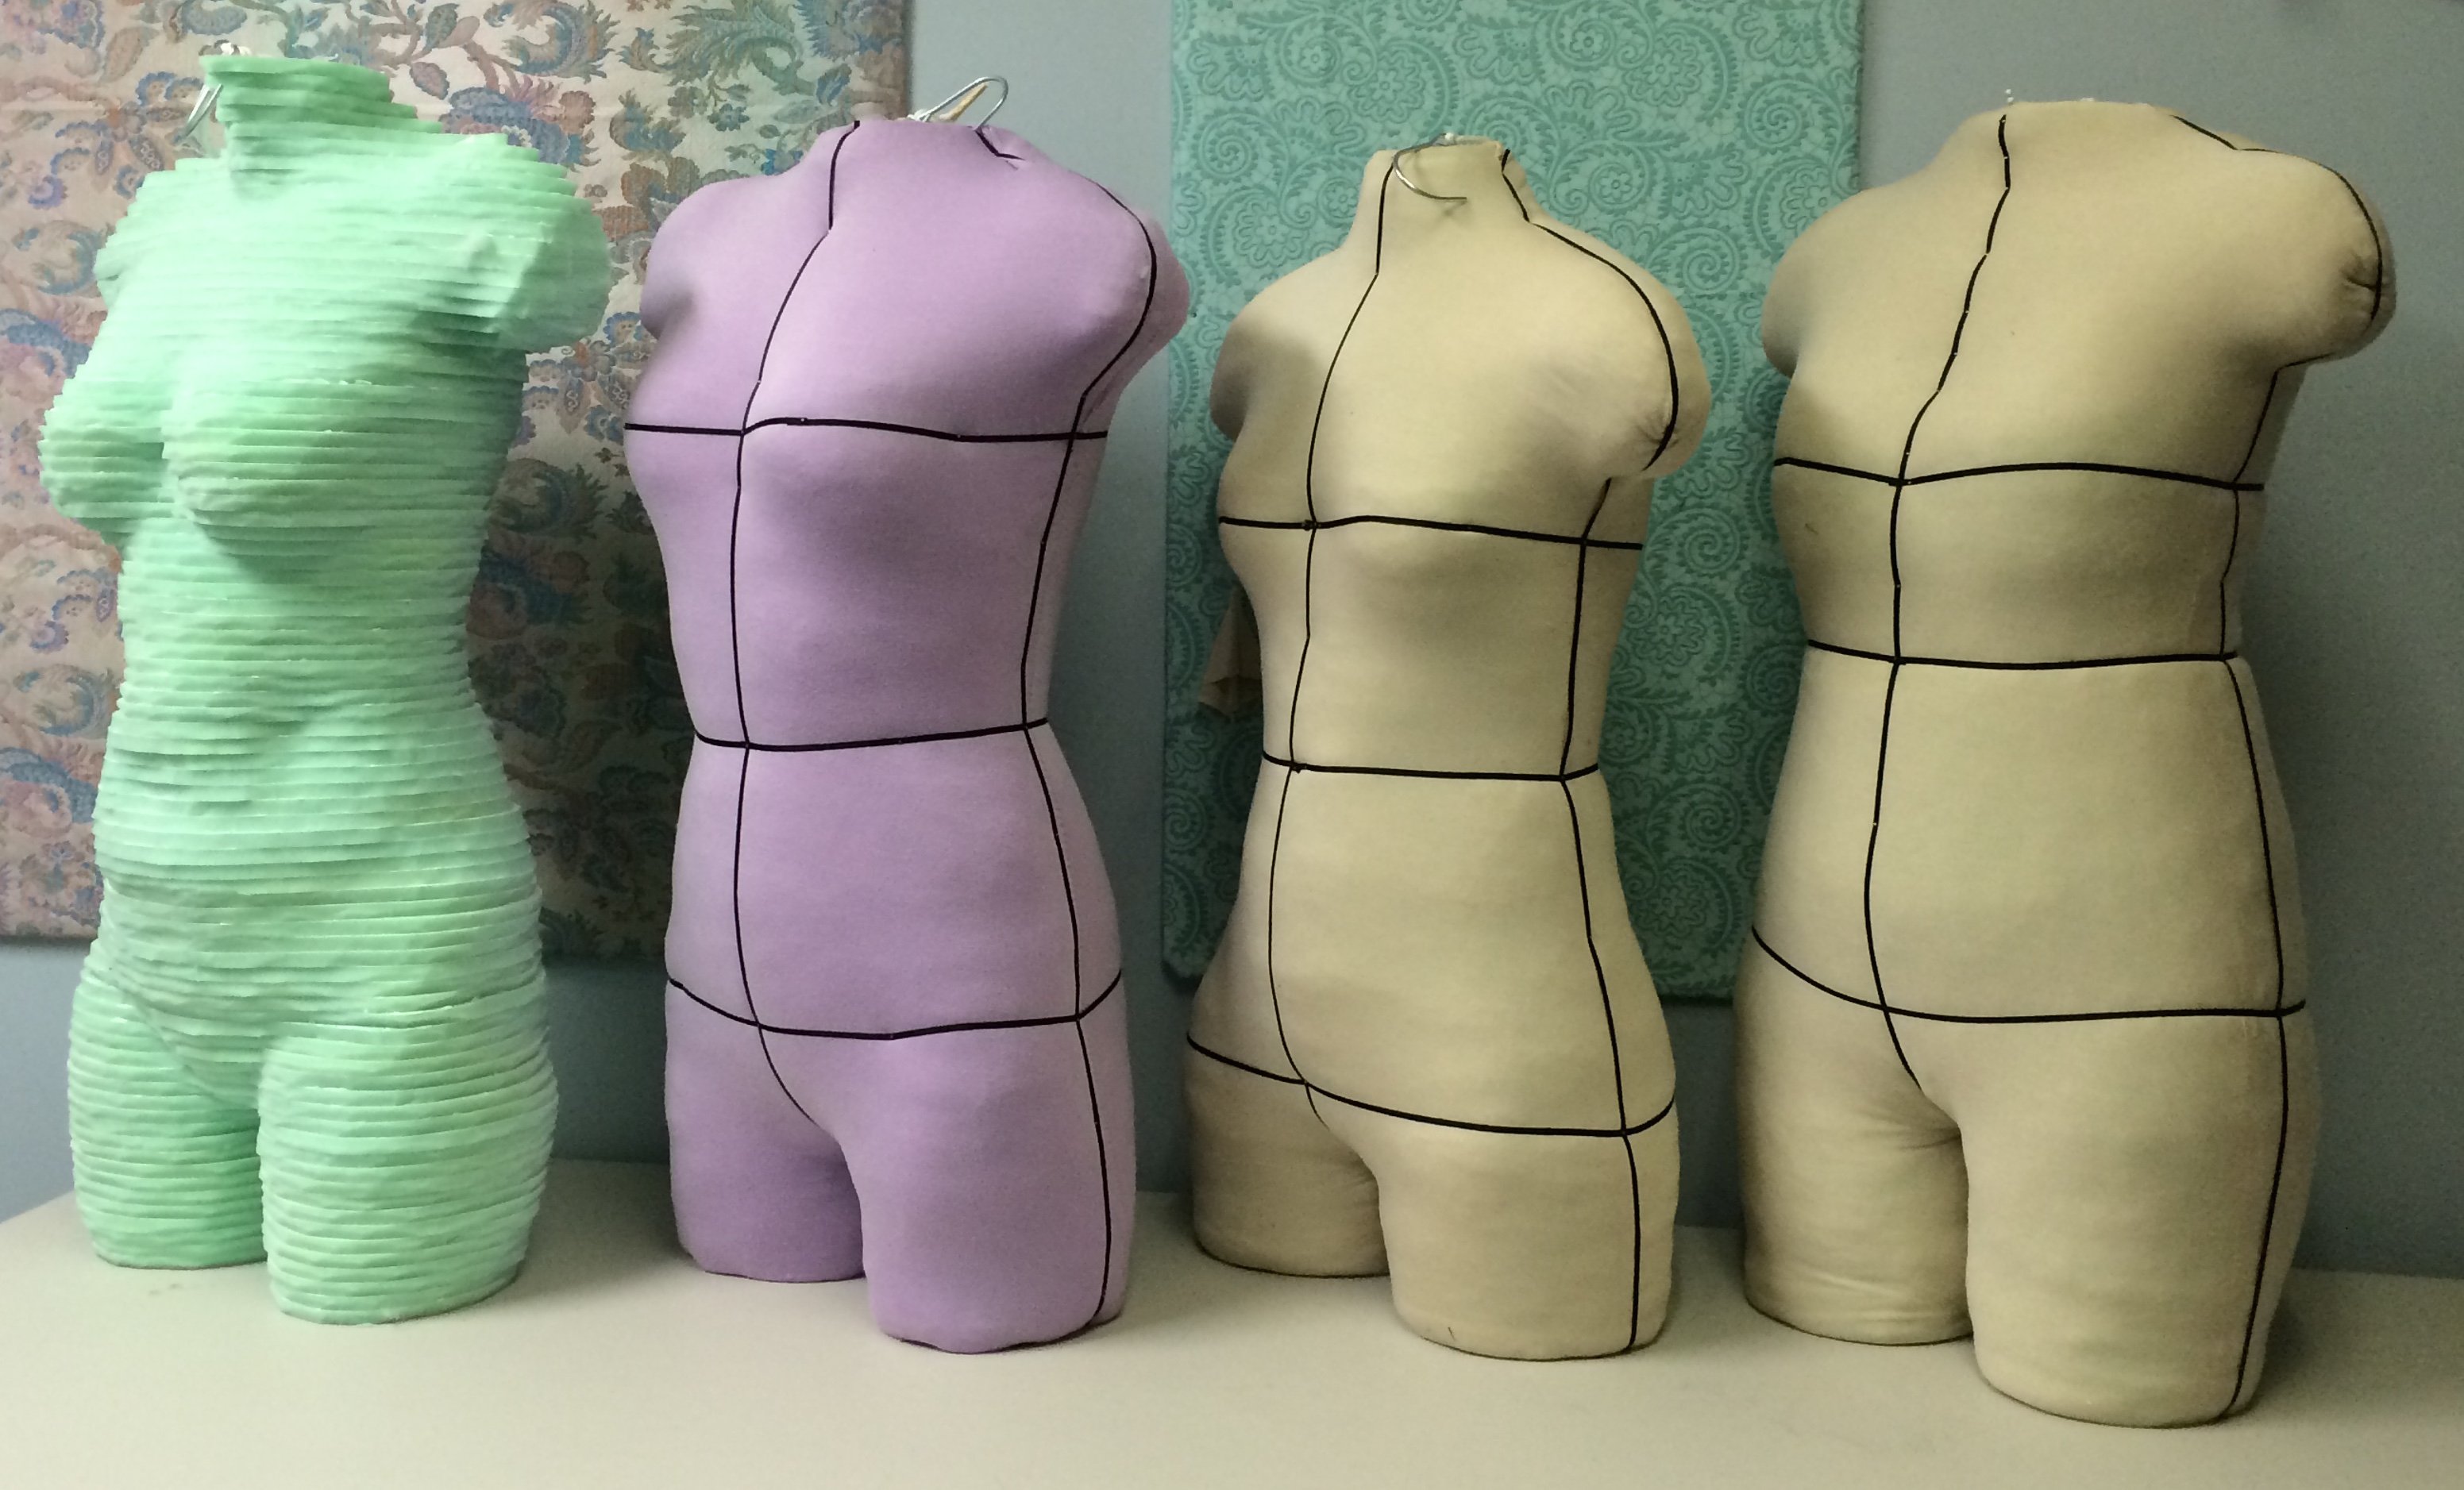 Company Proposes To Bring Custom Dress Forms To The Stitchy Masses With